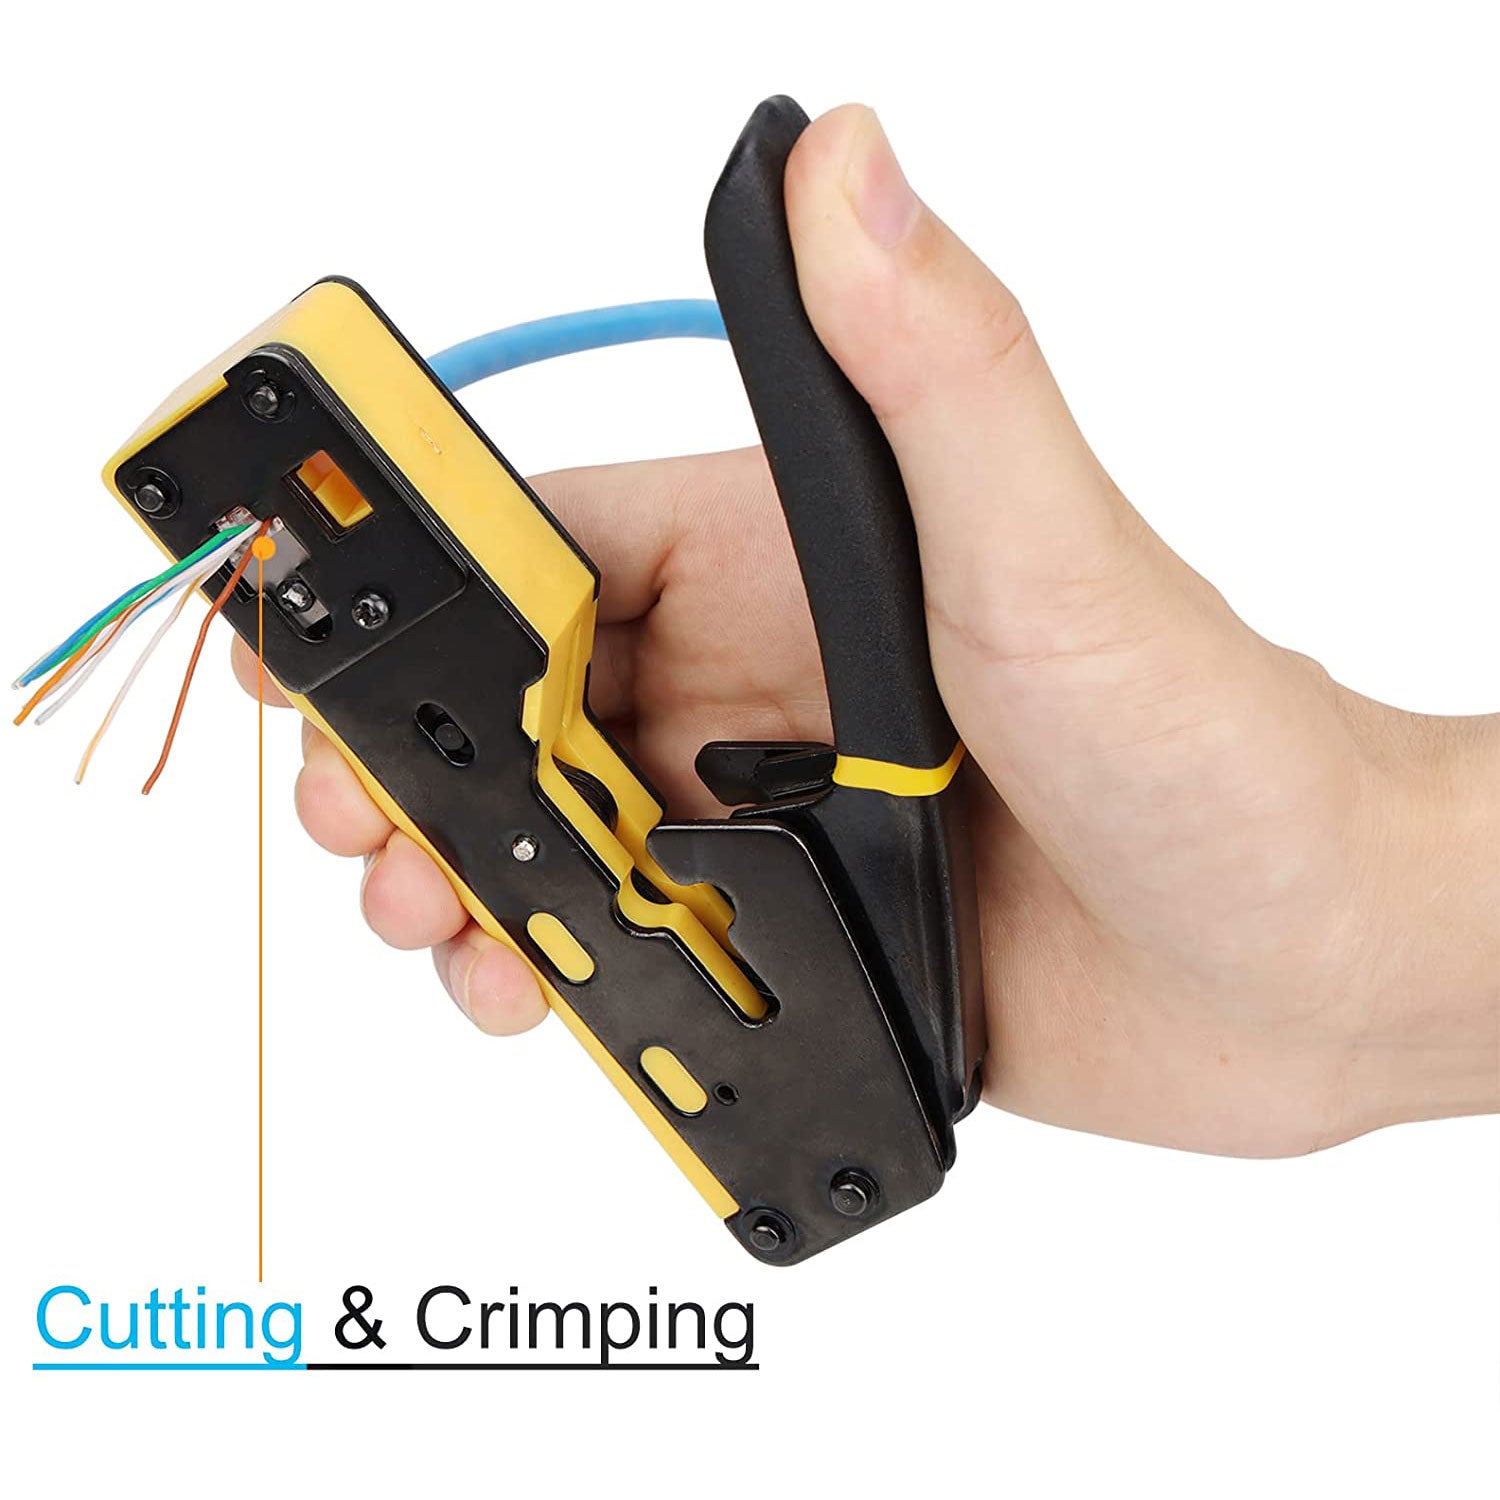 ZoeRax RJ45 Crimp Tool Pass Through Crimper Cutter for Cat6 Cat5 Cat5e 8P8C Modular Connector Ethernet All-in-one Wire Tool